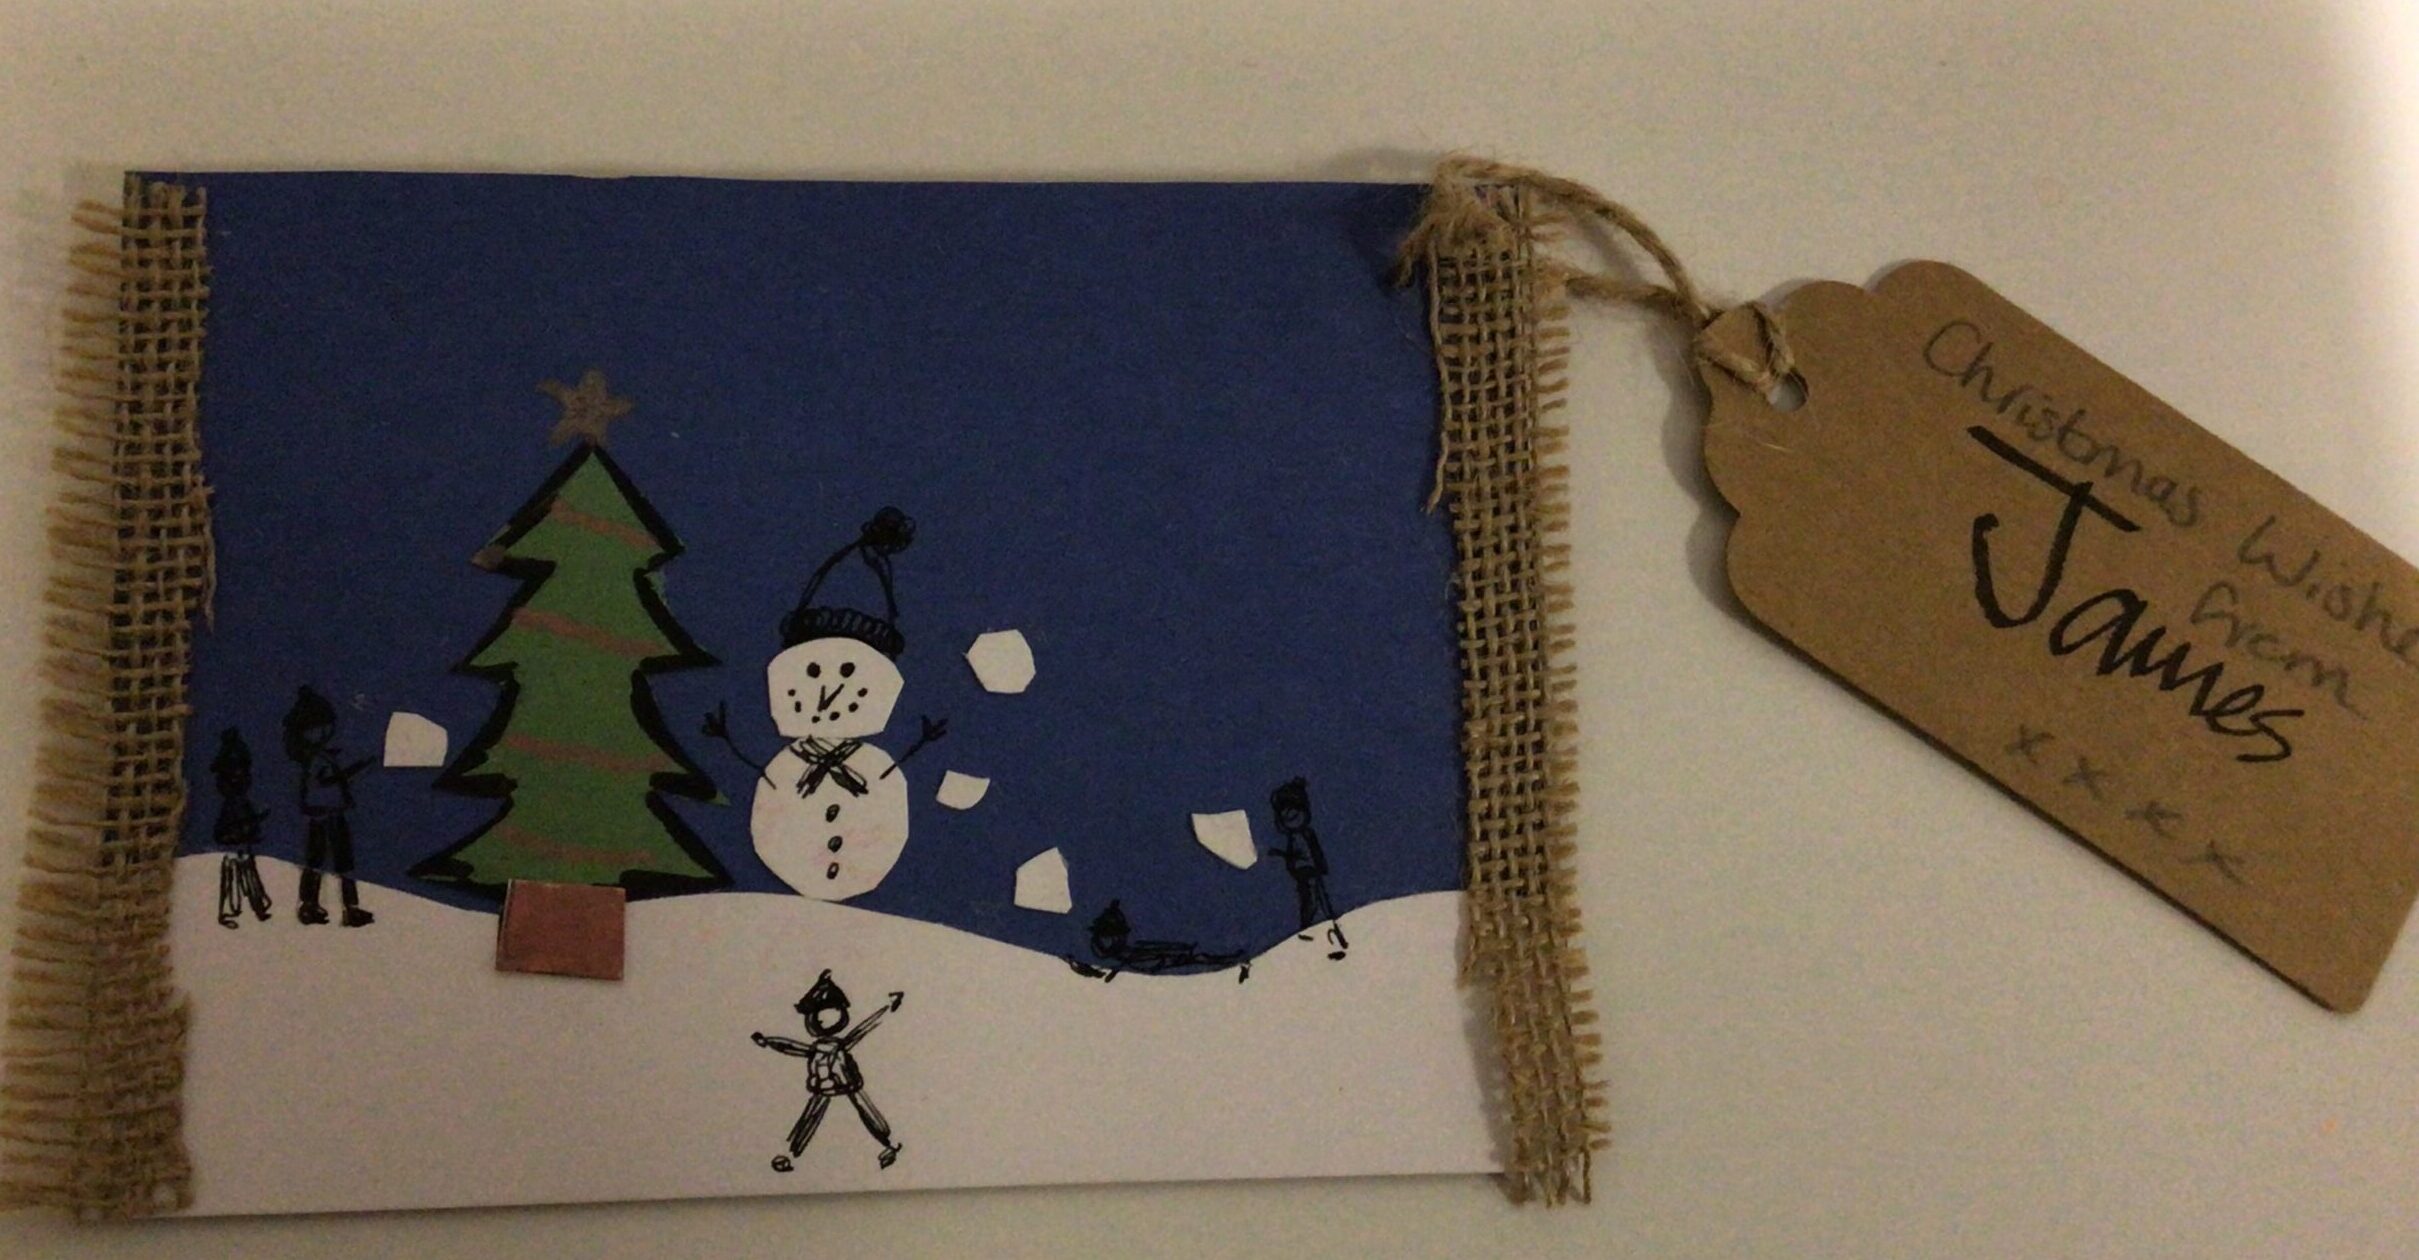 A postcard with a snowman and a Christmas tree with figures playing snowballs.